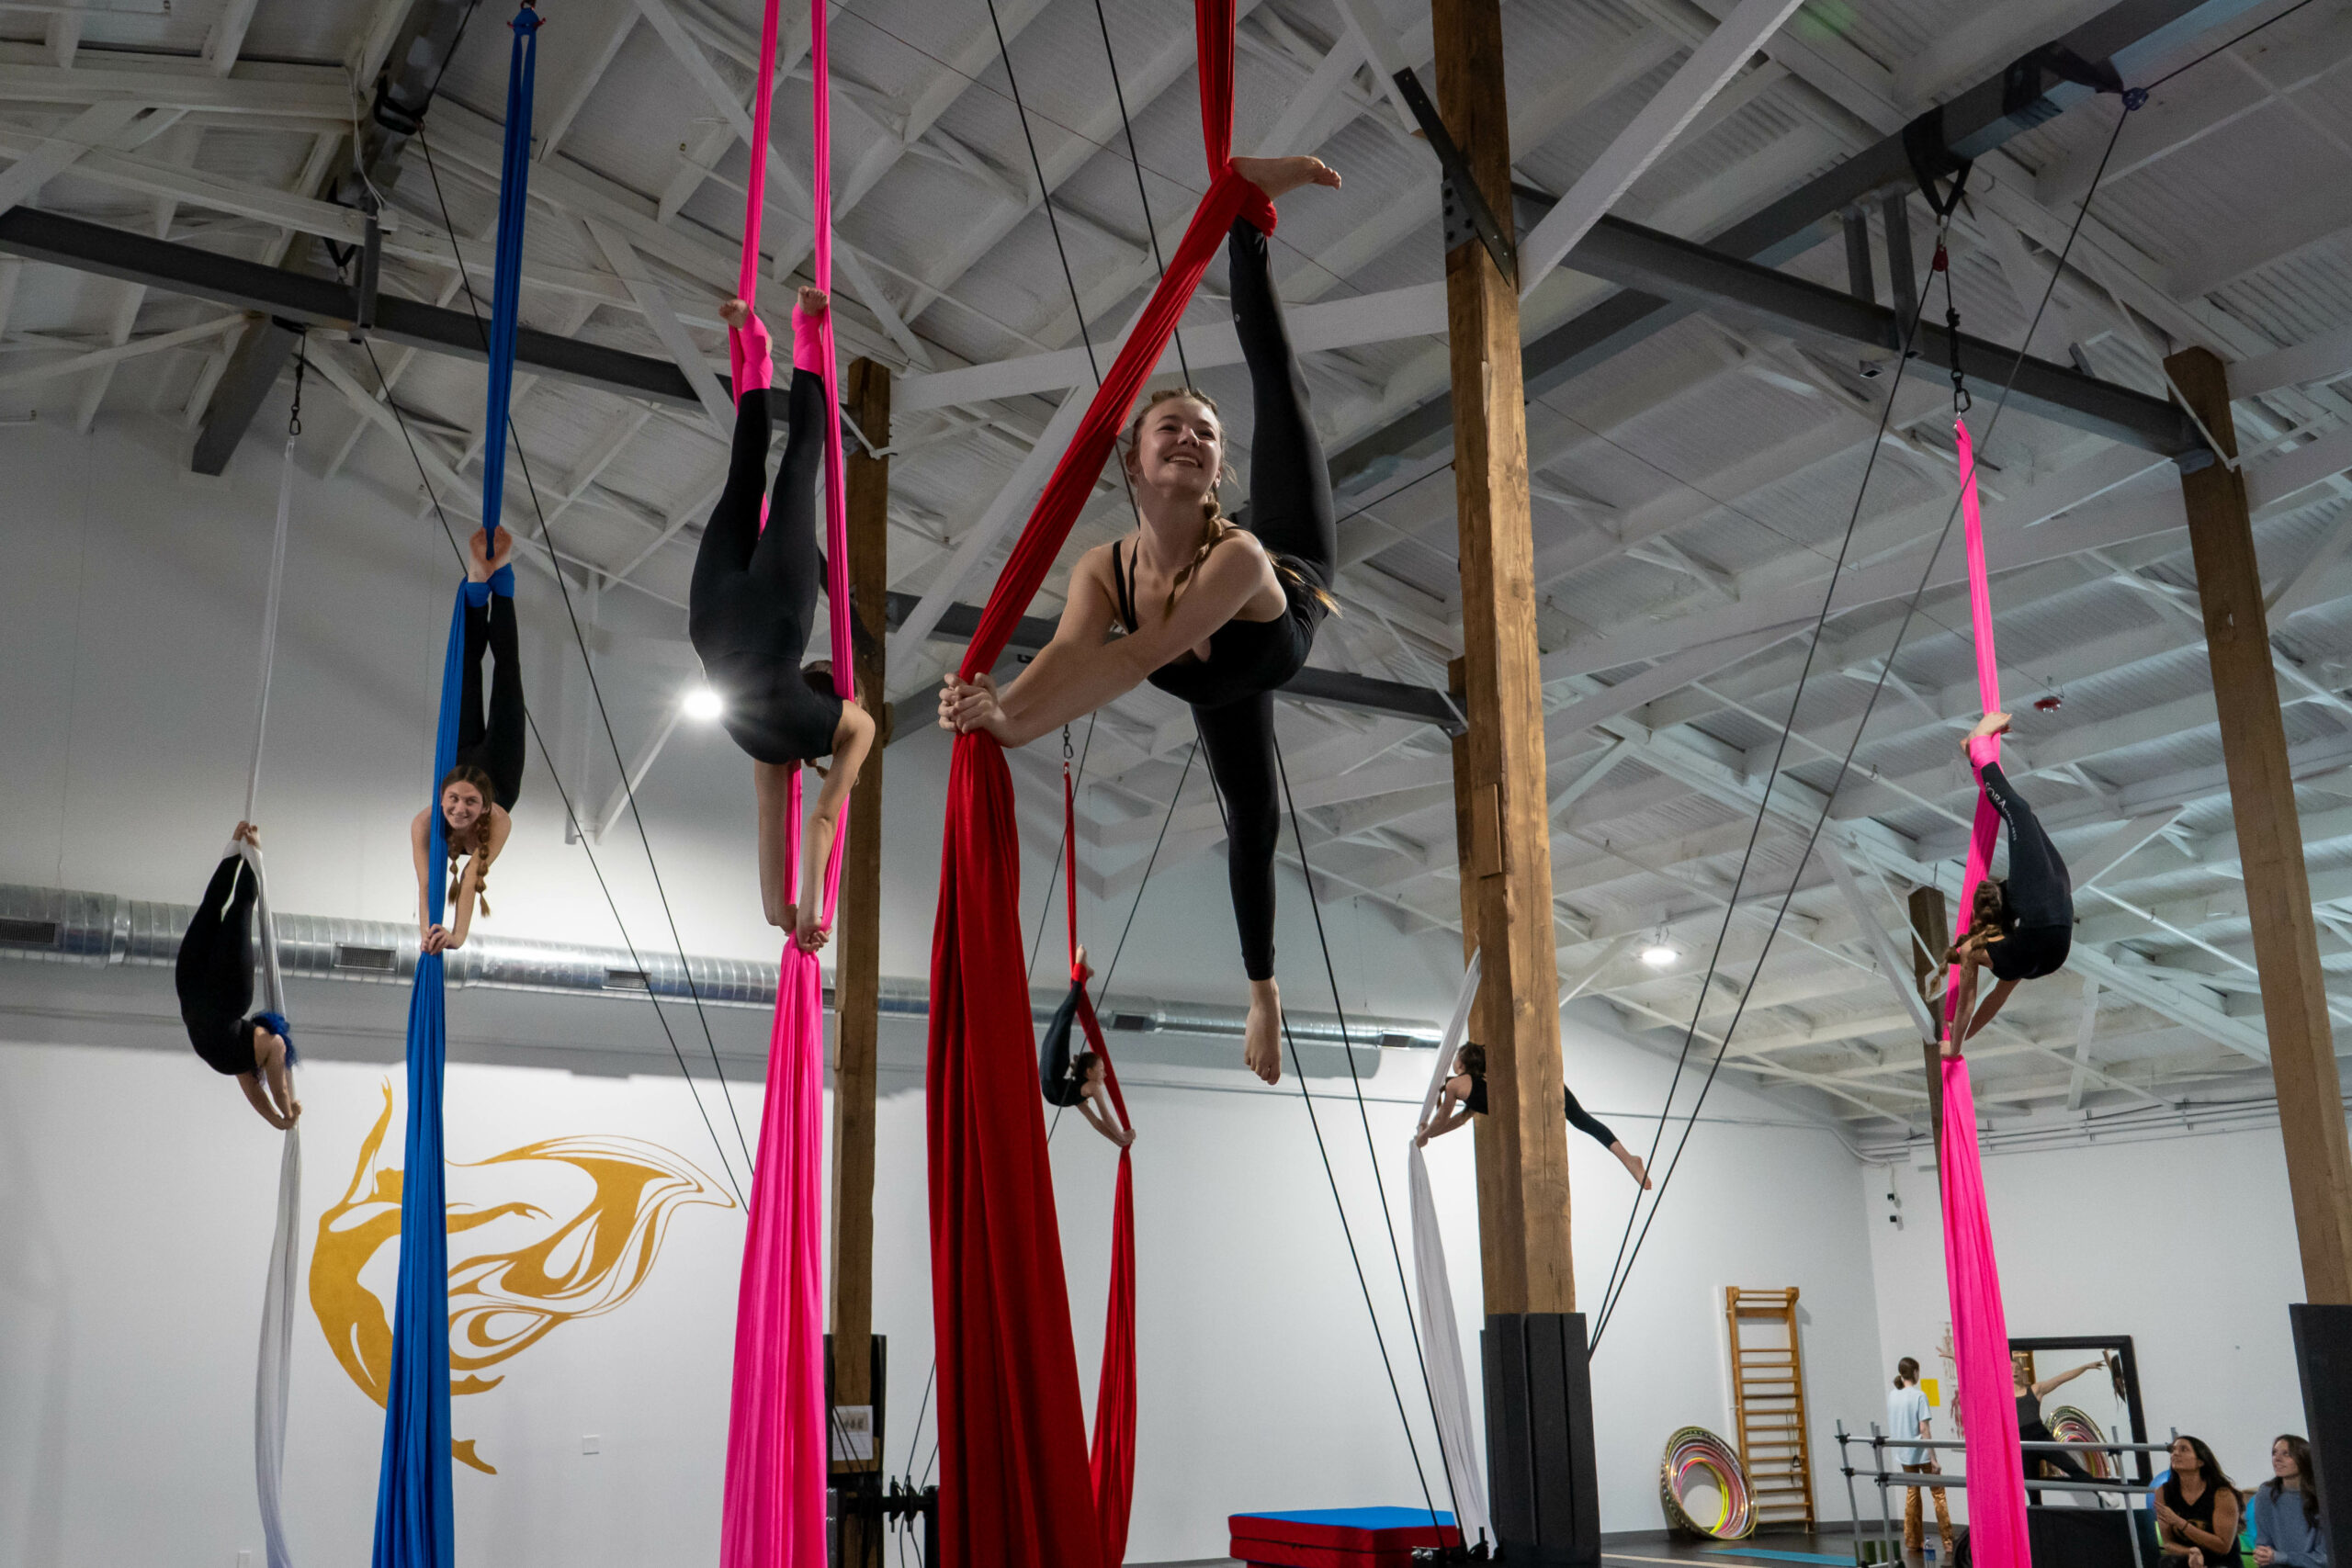 KY Aerial Arts, Circus, Pole, & Fitness Studio with Infrared Sauna - Sora  Aerial Arts